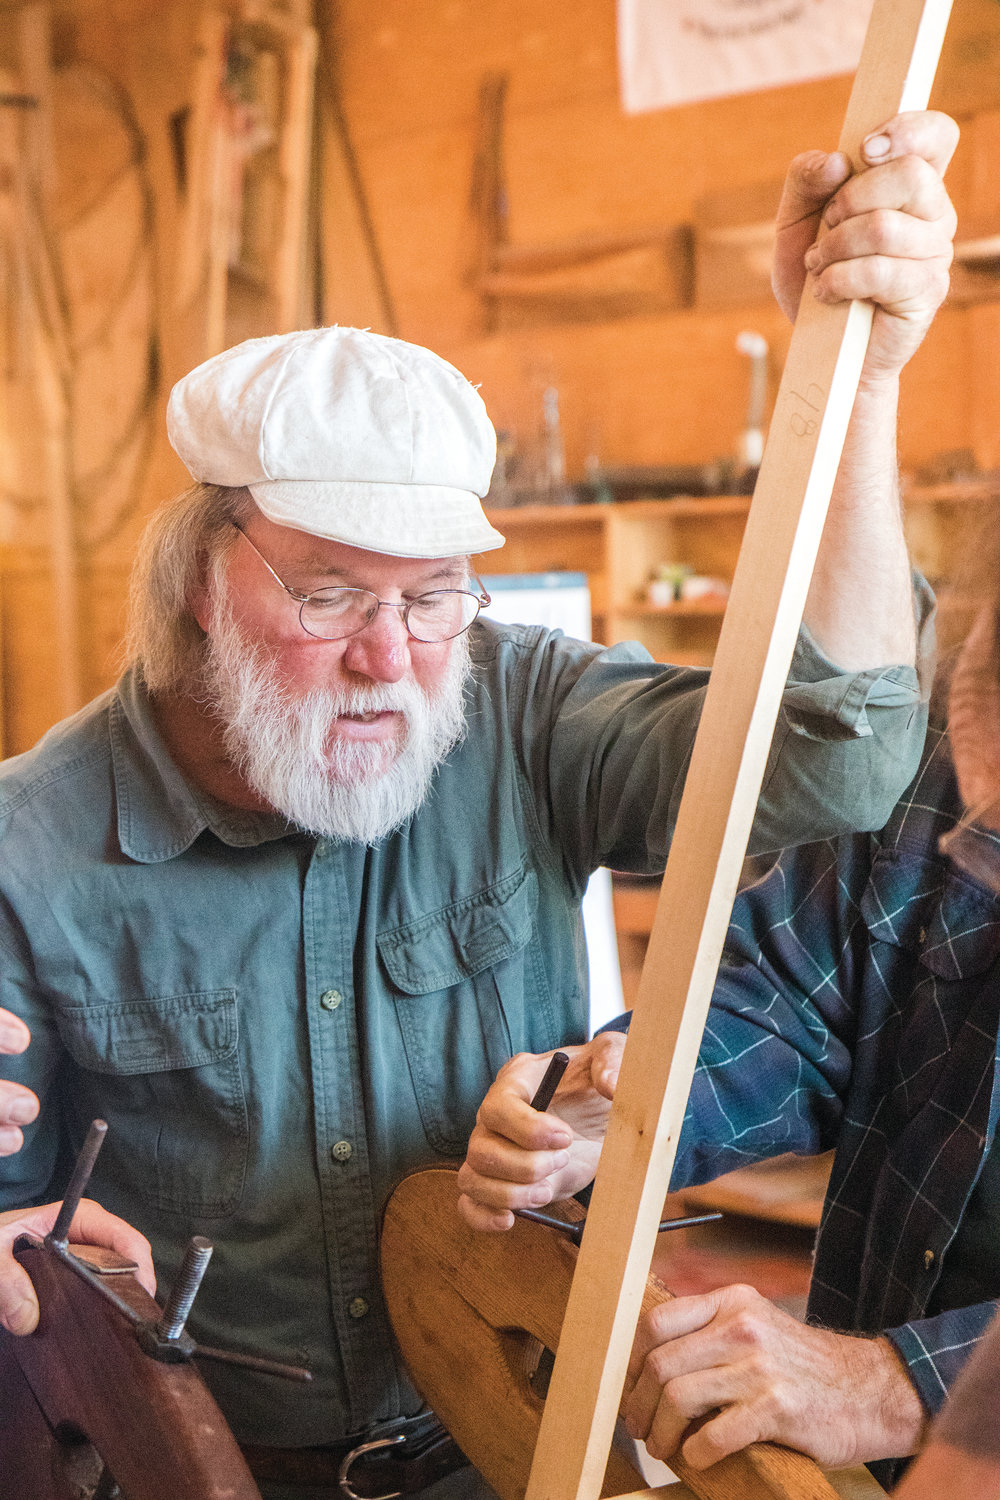 Jay Smith has been studying the art and science of Viking boat building since he was 27 years old. Now, he passes on the skills to new boat builders at the Northwest Maritime Center during a class from July 29 to Aug. 9. Stop by the Center’s boat shop at 431 Water St. to peek your head in and see its progress.